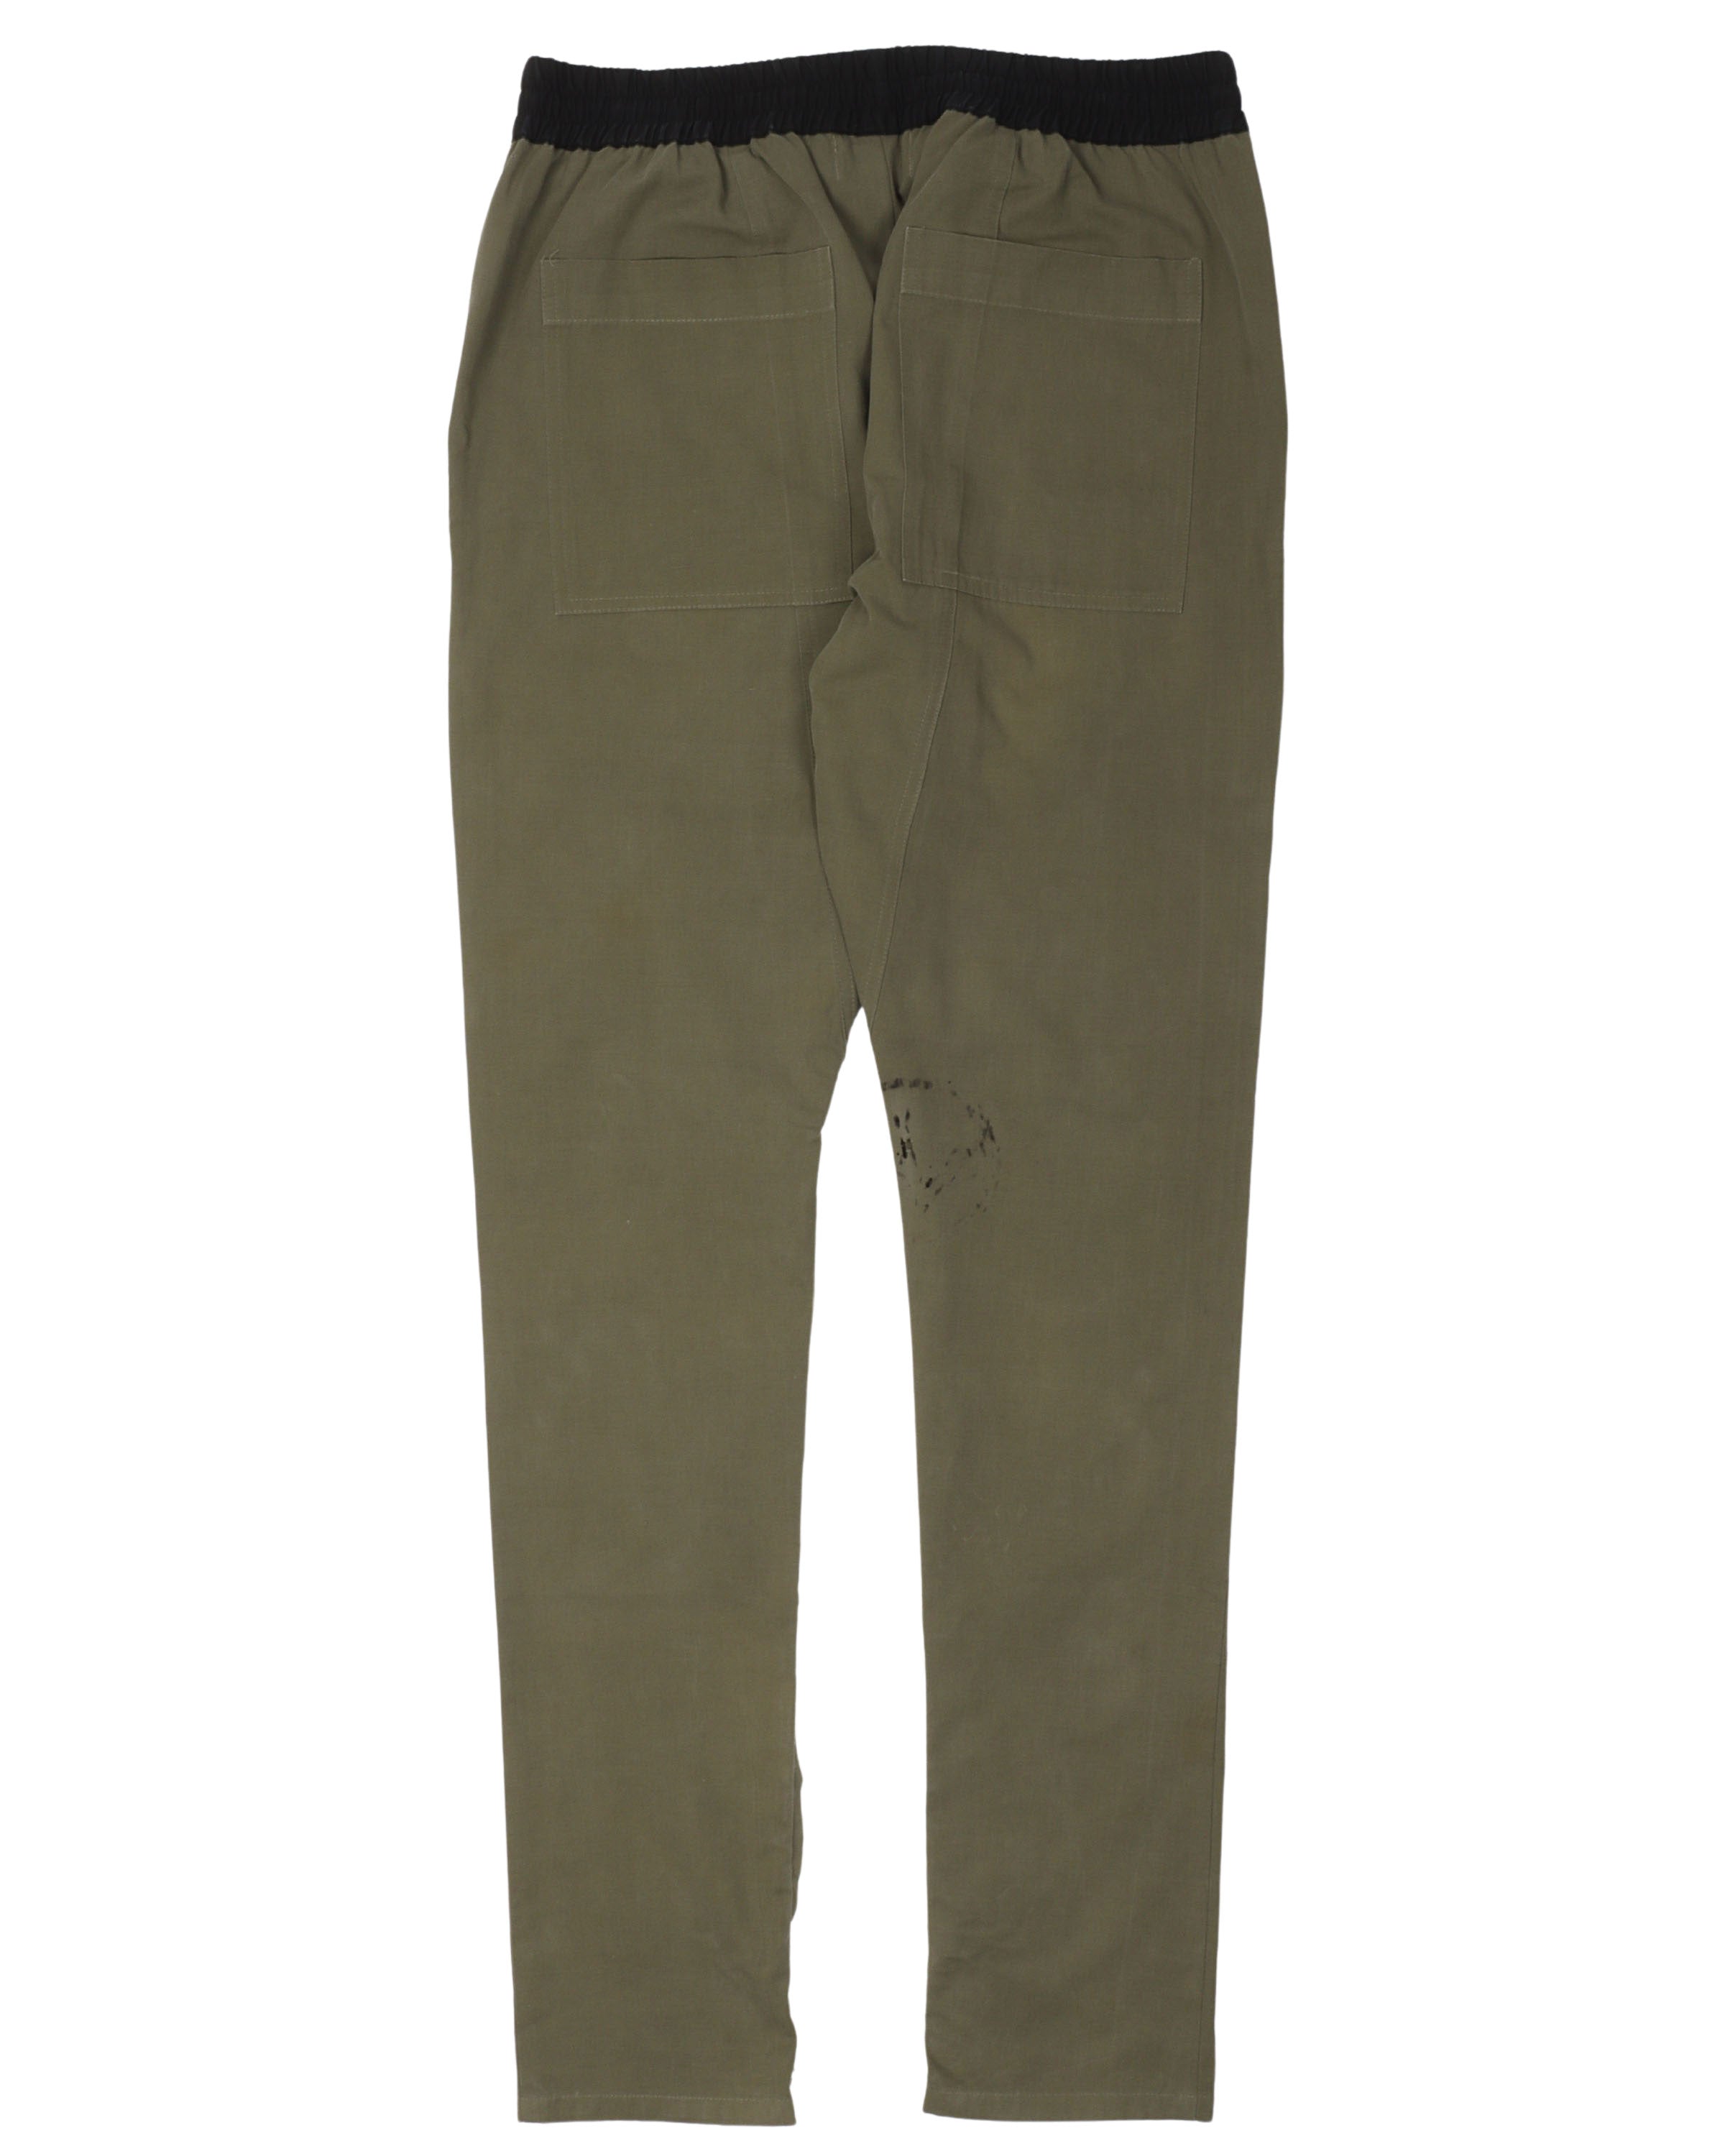 Third Collection Drawstring Trousers (Vintage Vietnam Sleeping Bag Edition)